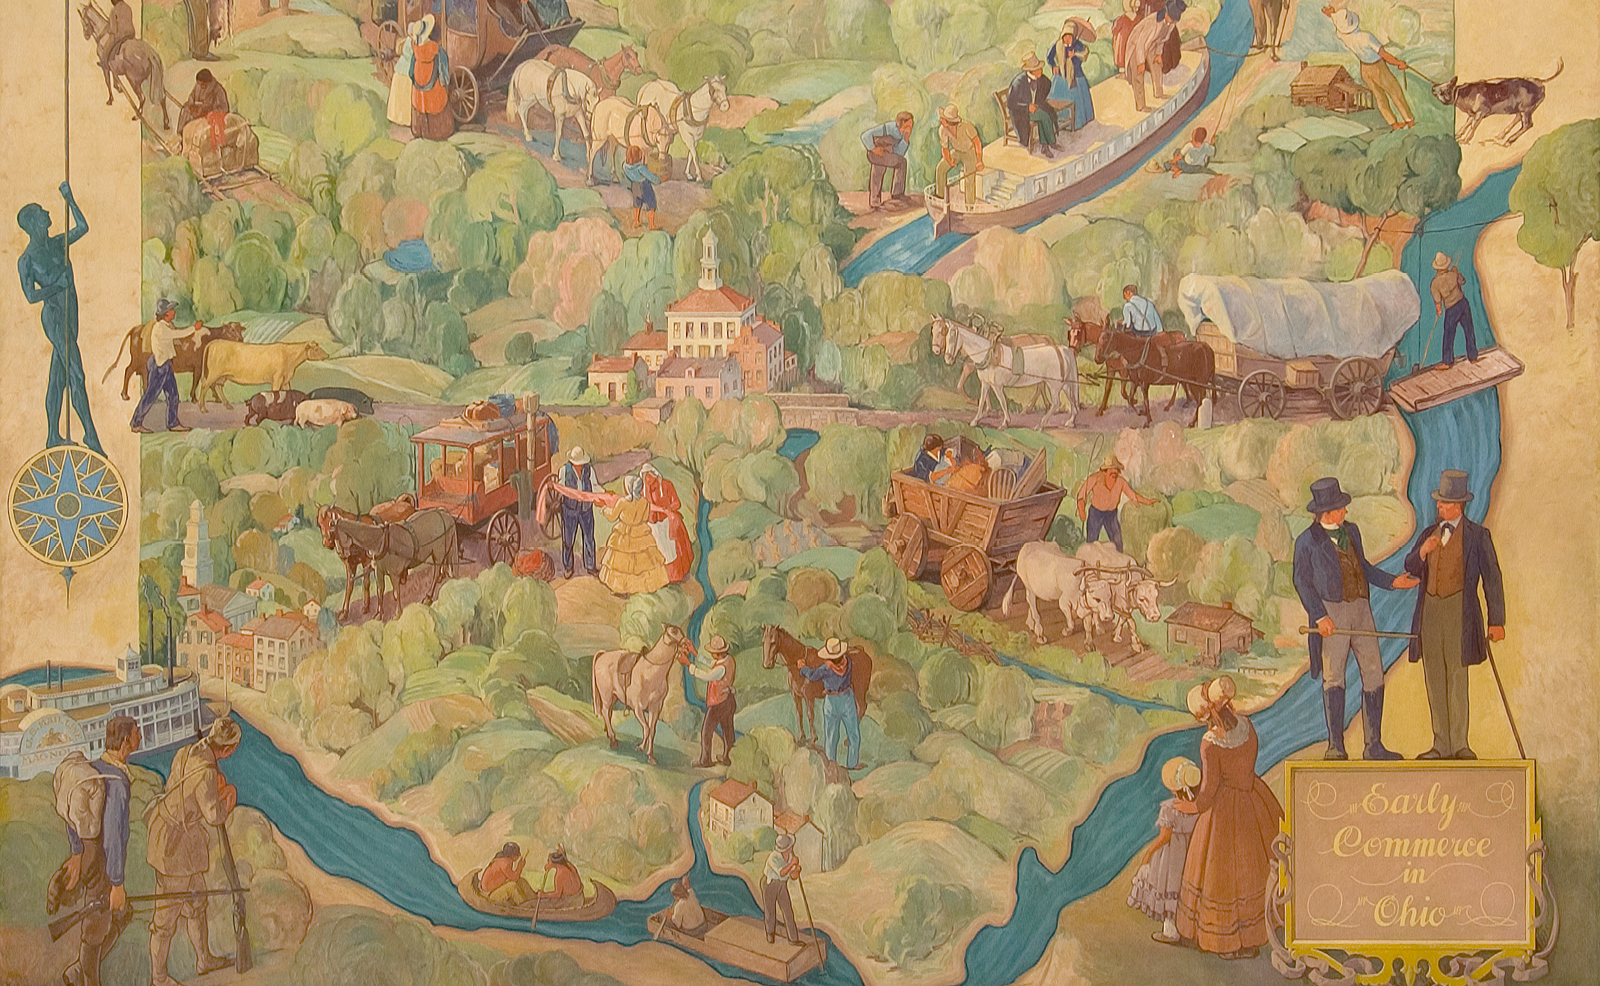 Image of the mural of early commerce in Ohio featured in the Thomas J. Moyer Ohio Judicial Center